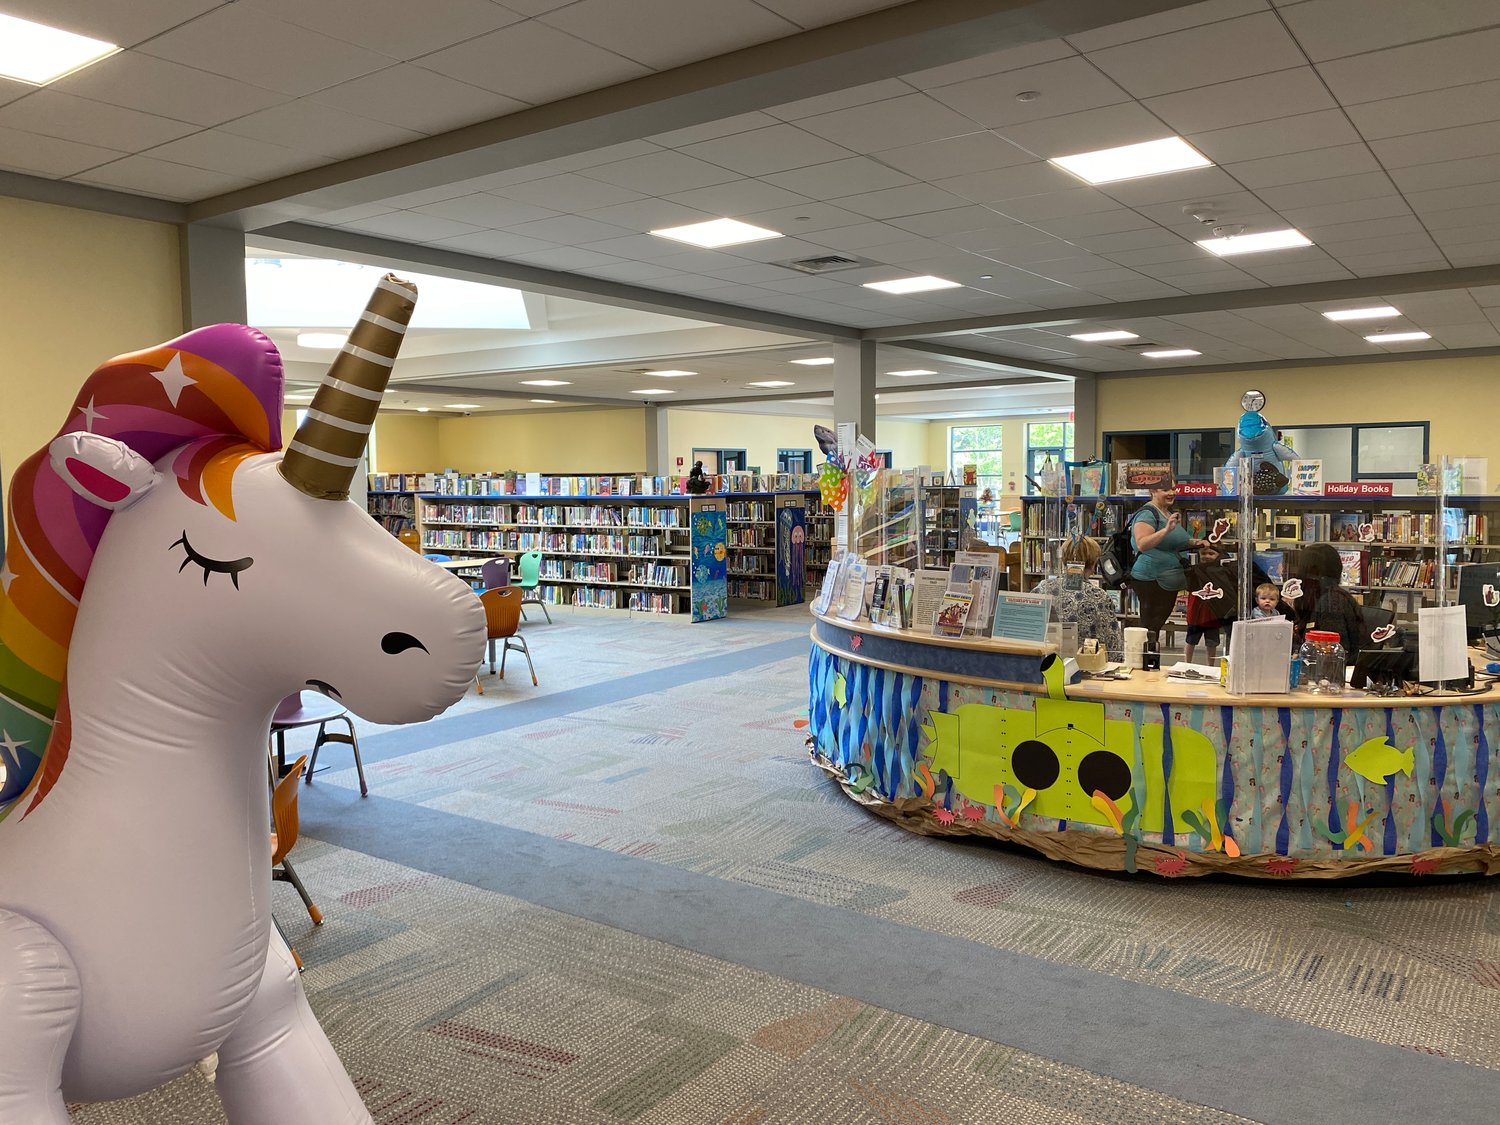 The bright and colorful children’s room, with a welcoming inflatable unicorn at the entrance.